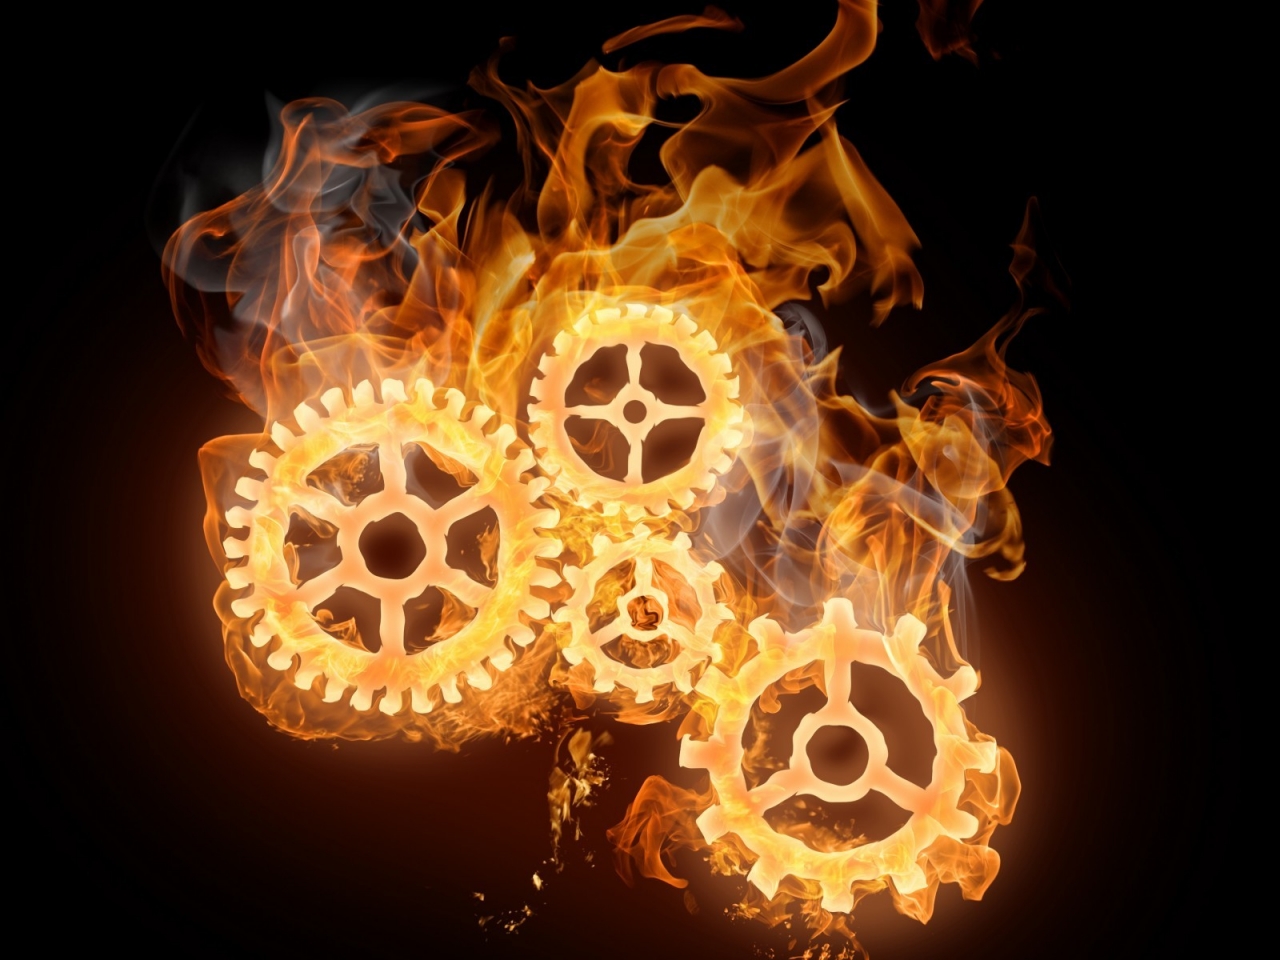 Wheels on Fire for 1280 x 960 resolution